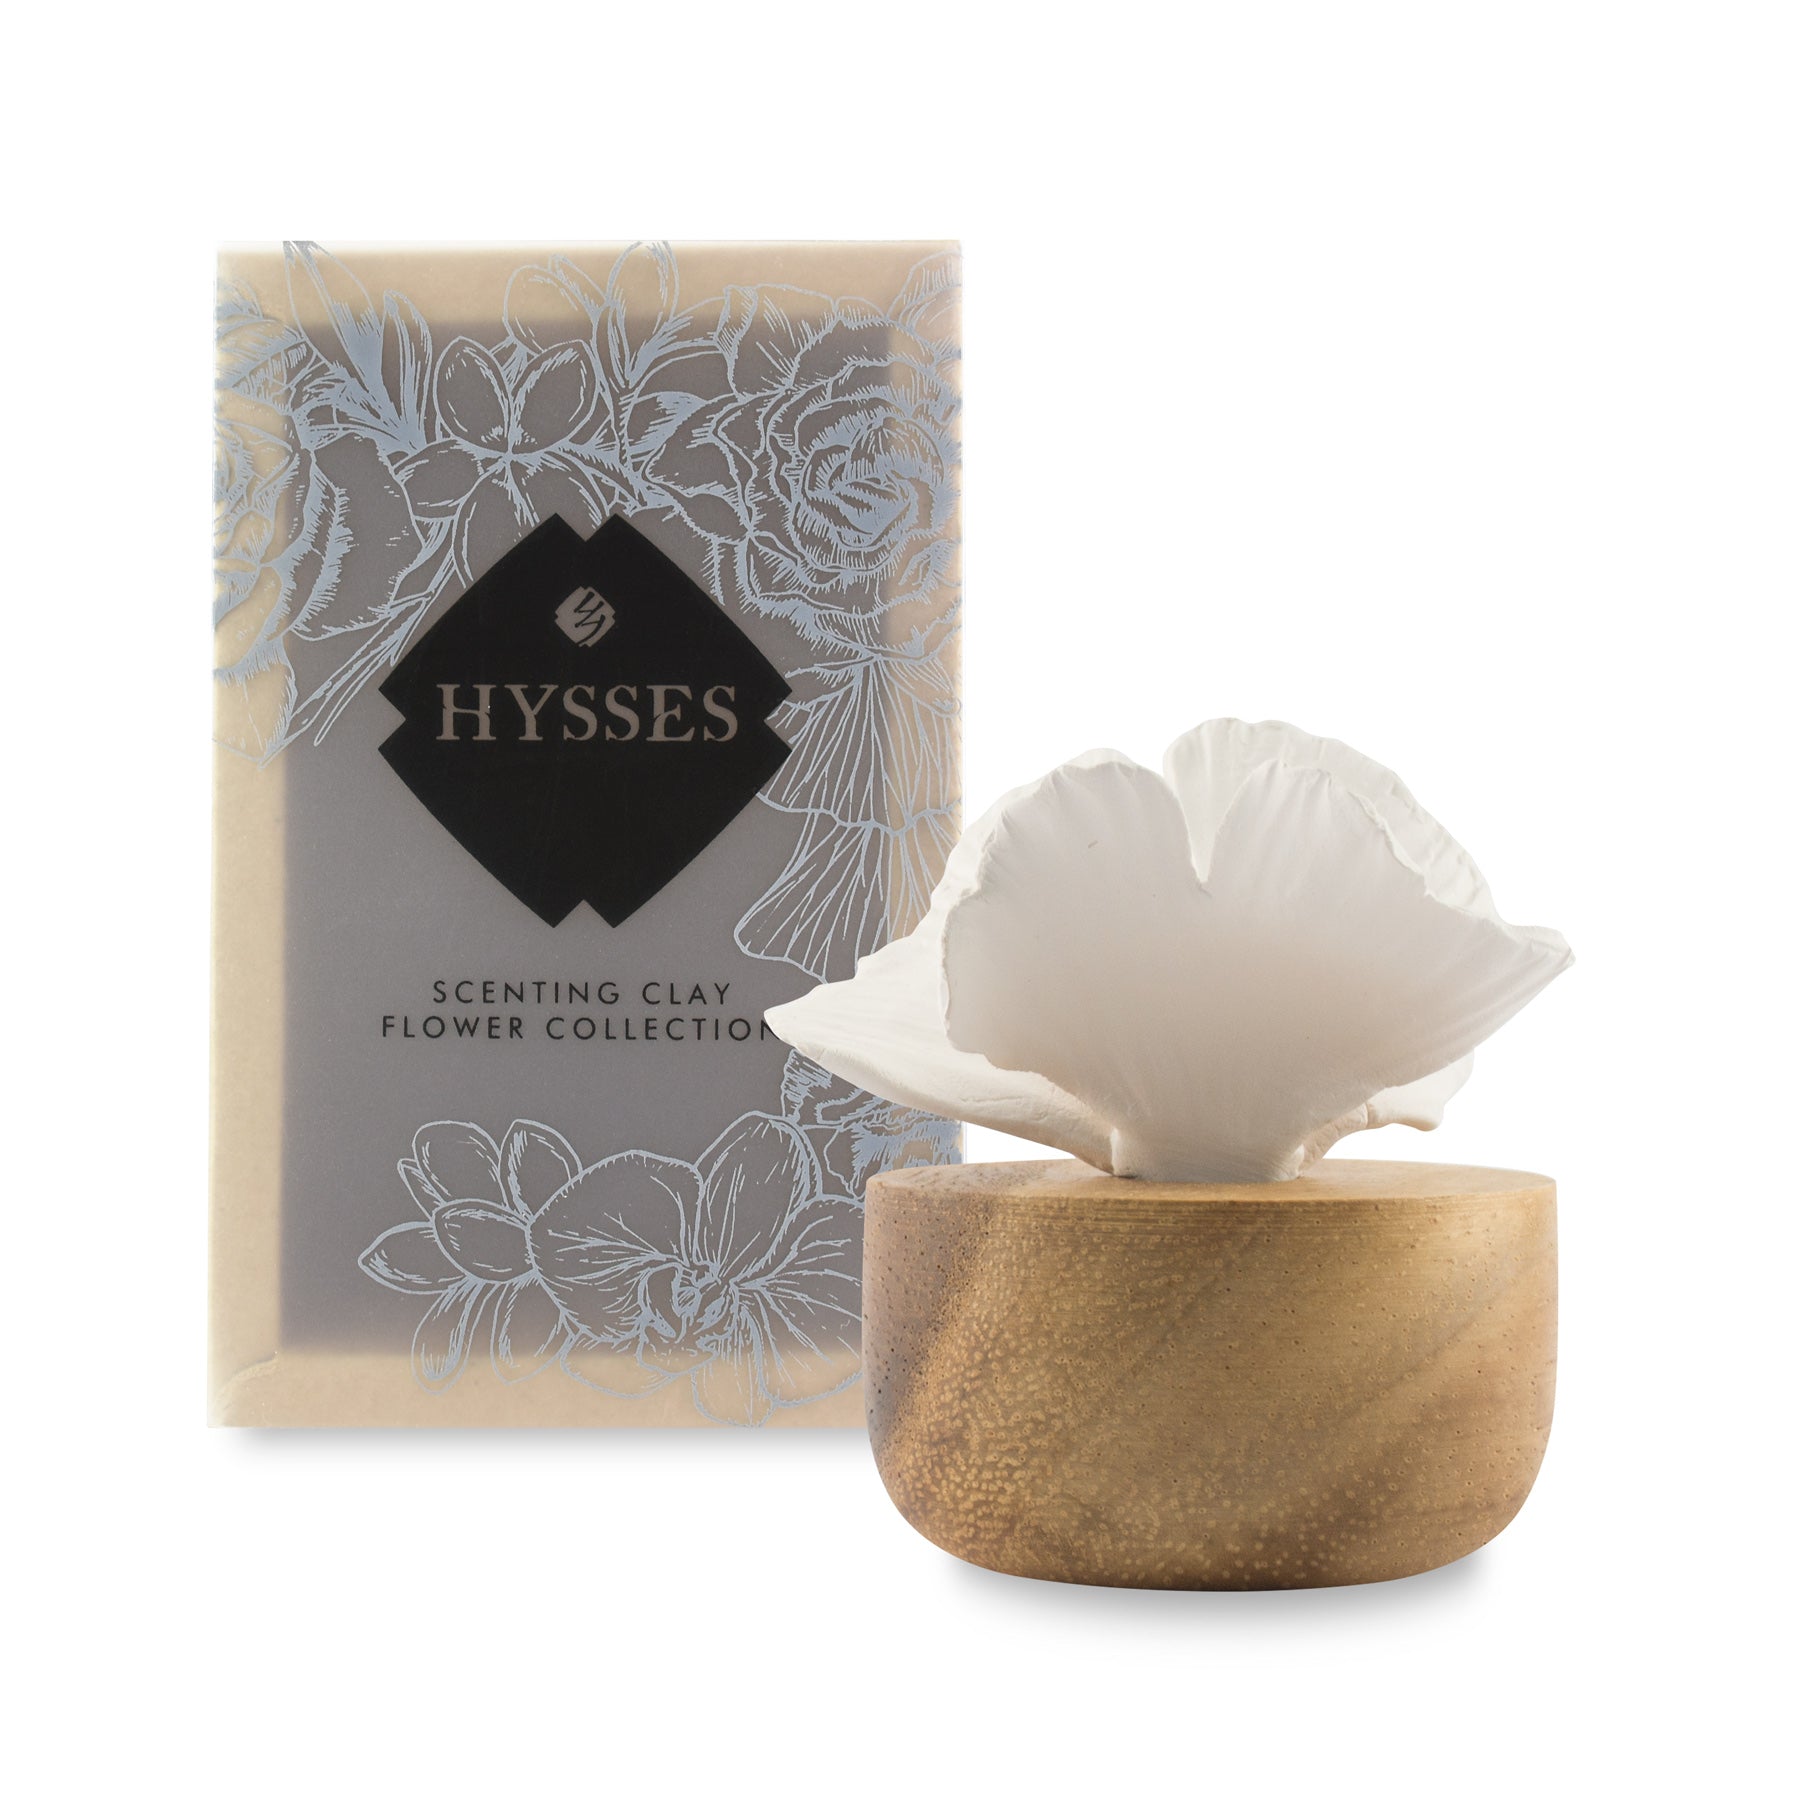 Ginkgo Flower Refreshment Scenting Clay - HYSSES